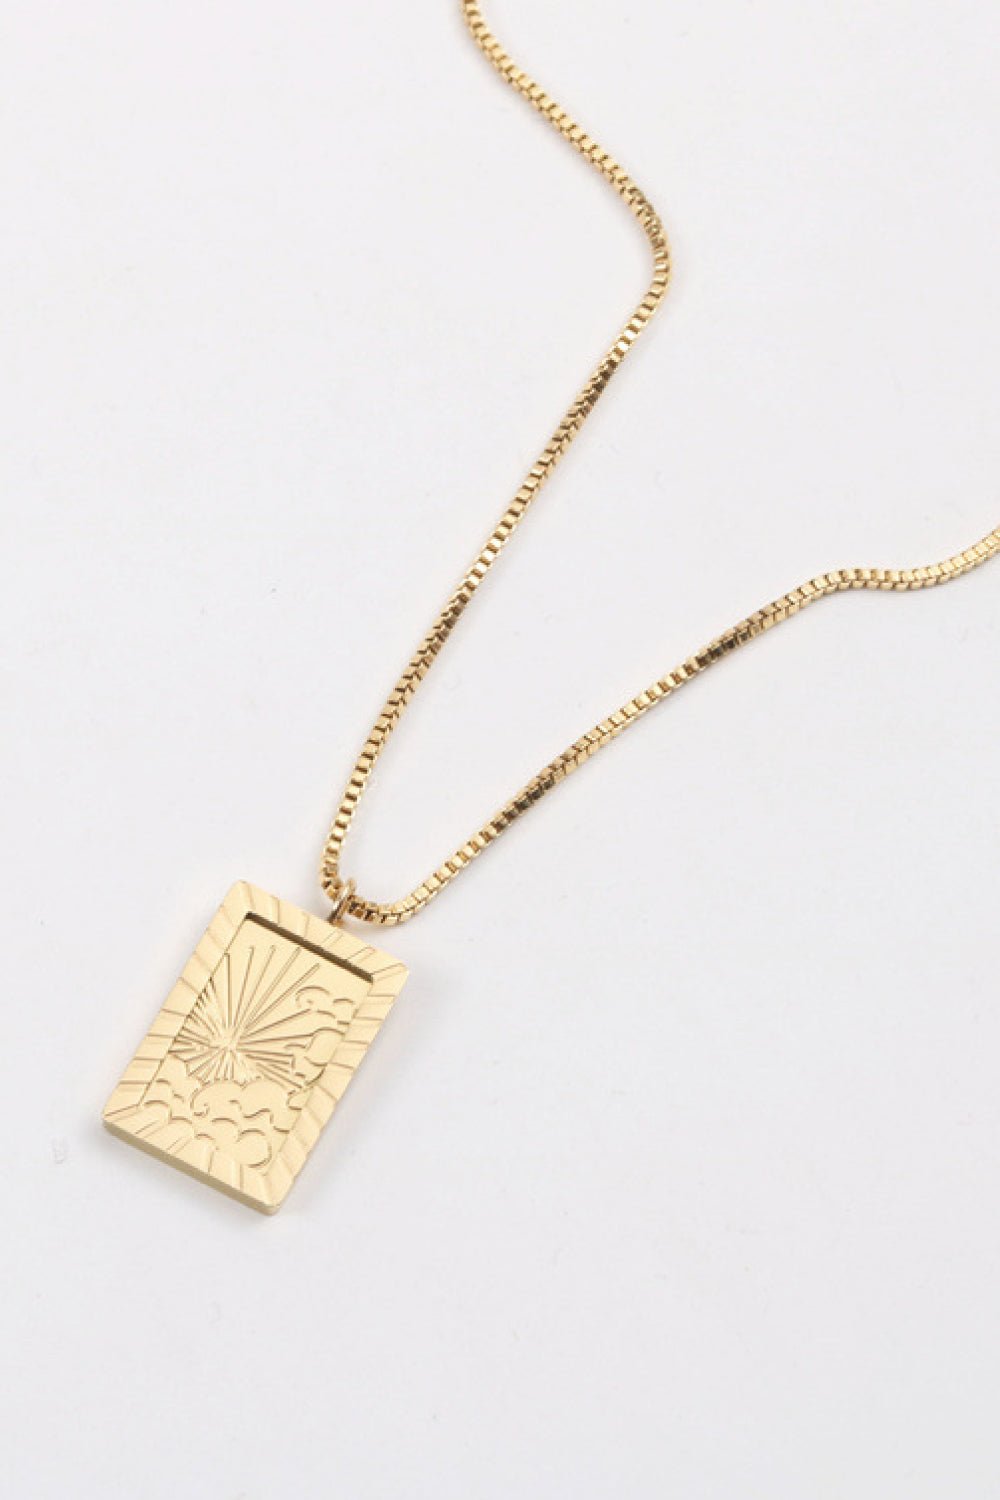 Moon and Sun 18K Gold-Plated Necklace - Tangerine Goddess